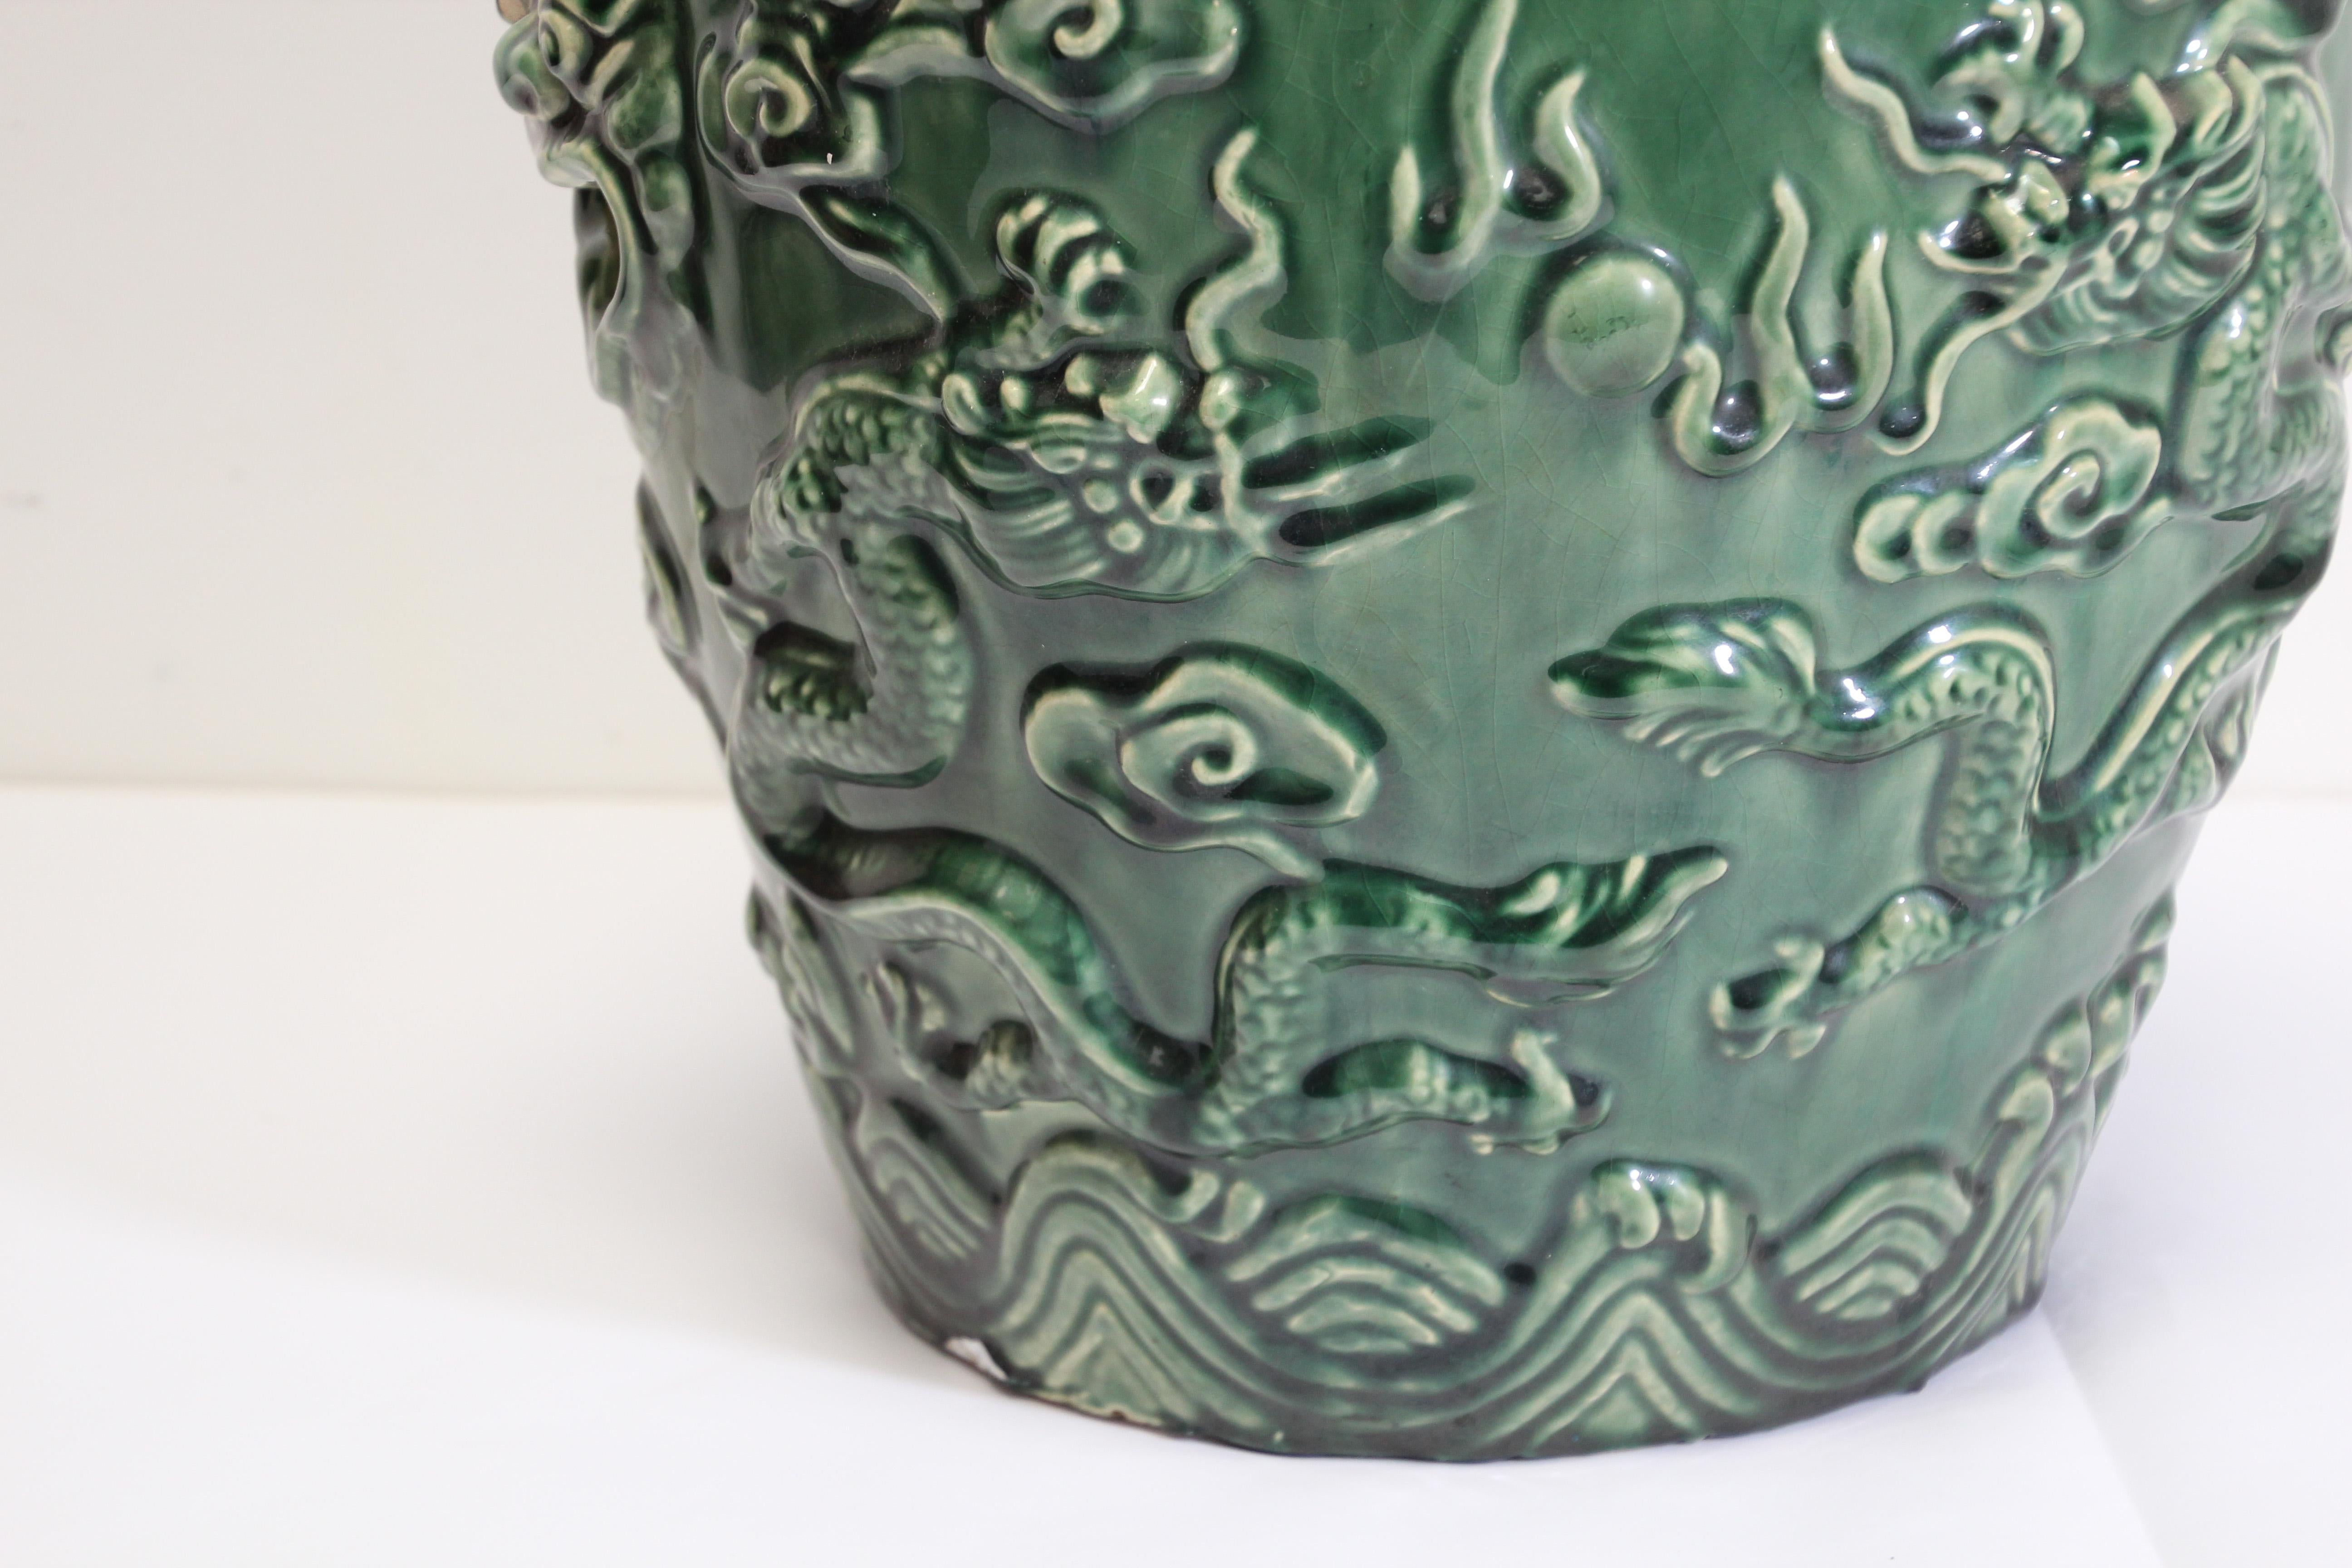 Chinese Export Emerald Green Chinese Ceramic Garden Stool with Dragons